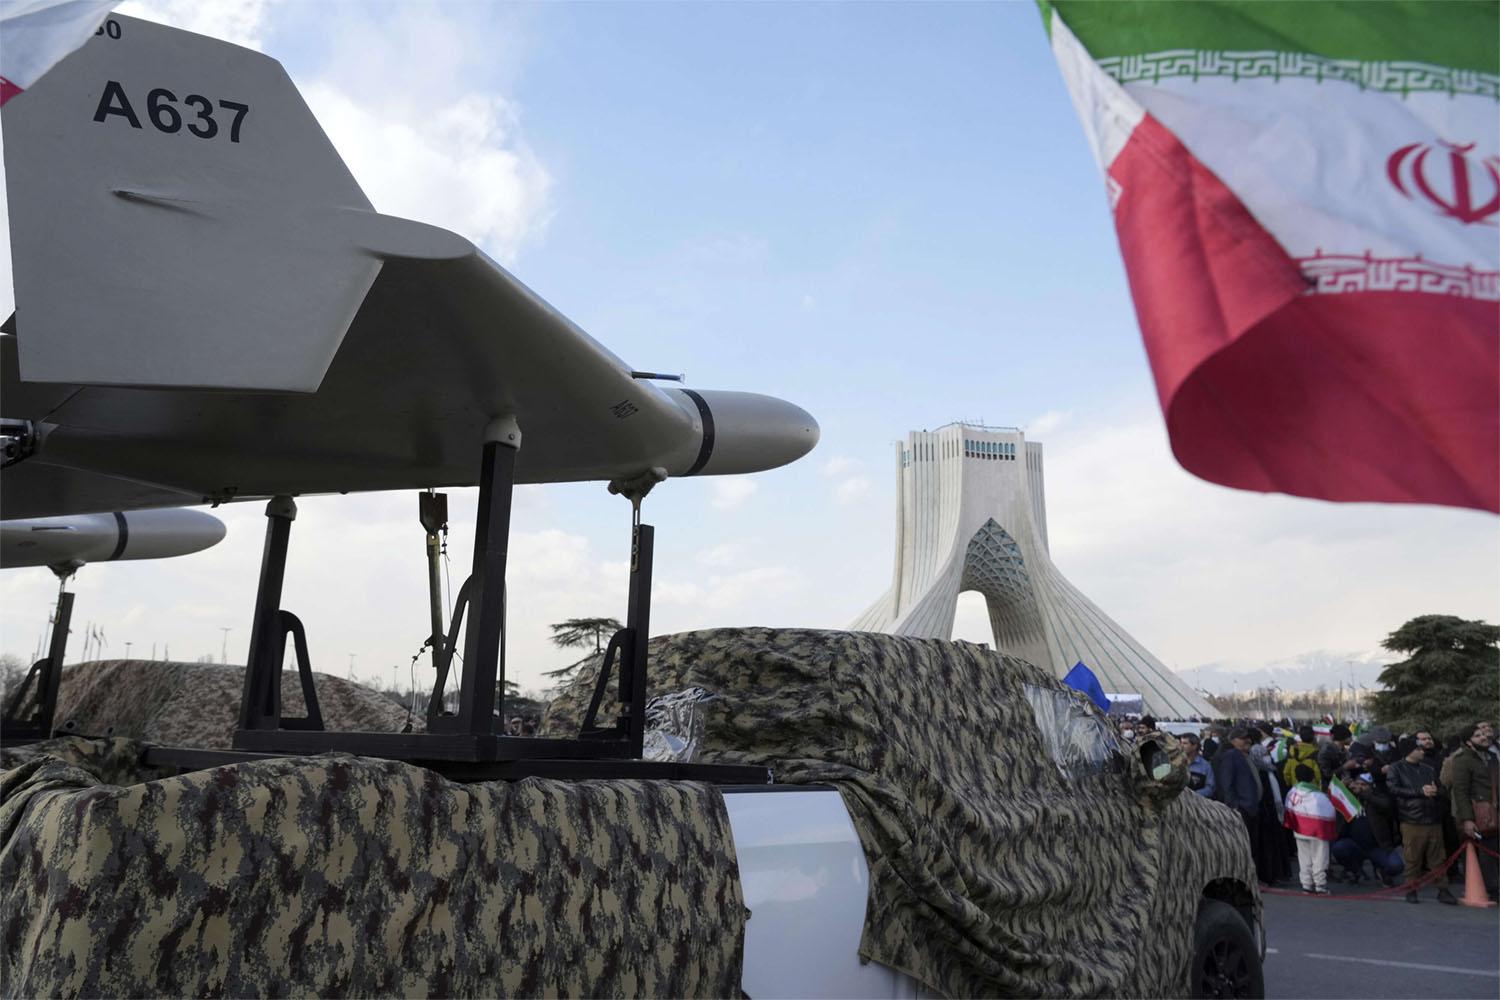 The new sanctions mark the latest move by Washington targeting Iran's UAV industry